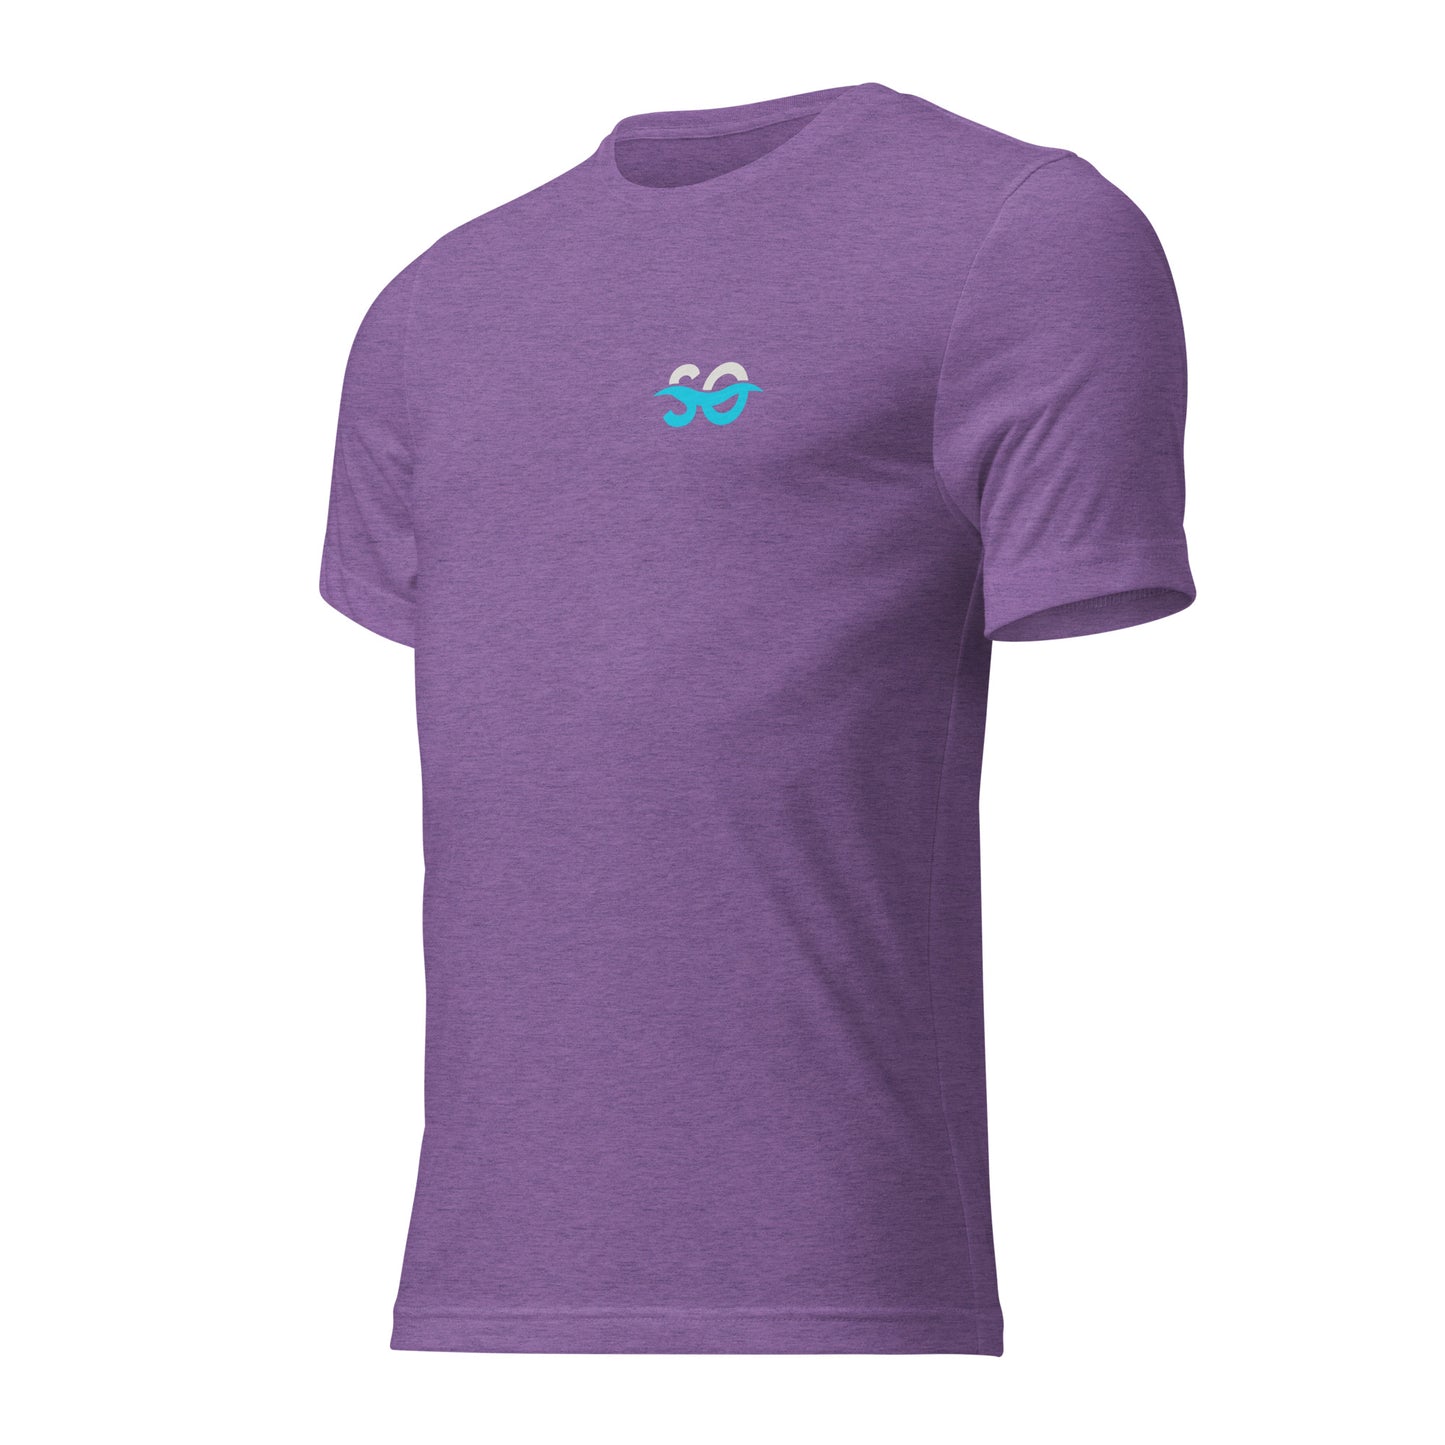 a purple t - shirt with a blue and pink logo